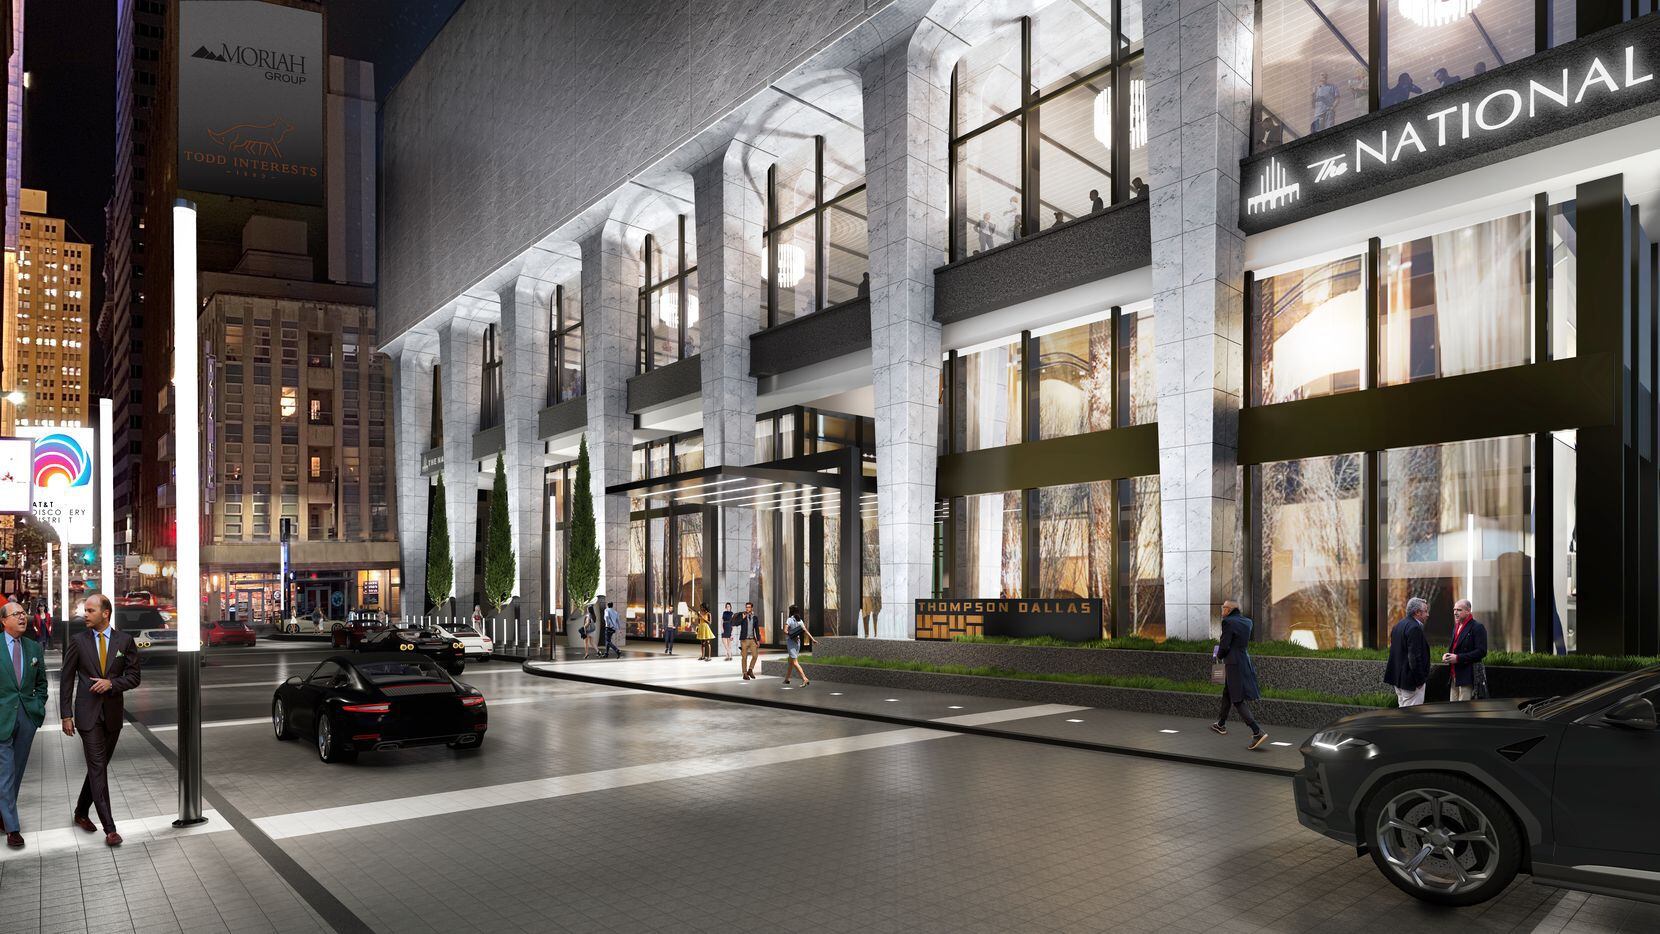 The National at 1401 Elm St. includes the Thompson Dallas hotel, apartments, retail and...